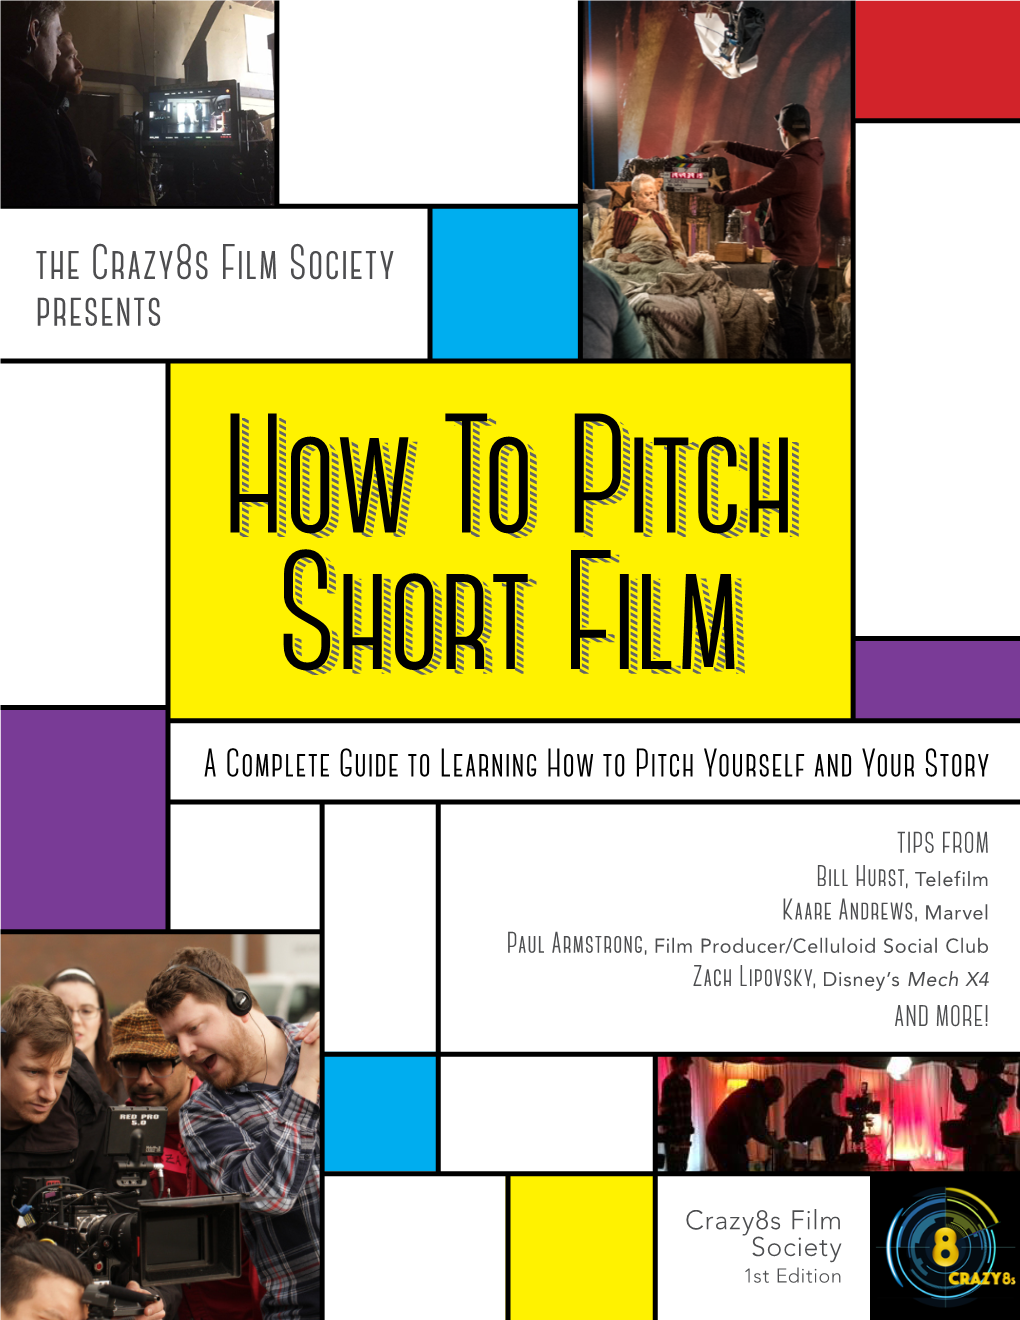 The Crazy8s Film Society Presents Howhow Toto Pitchpitch Shortshort Filmfilm a Complete Guide to Learning How to Pitch Yourself and Your Story